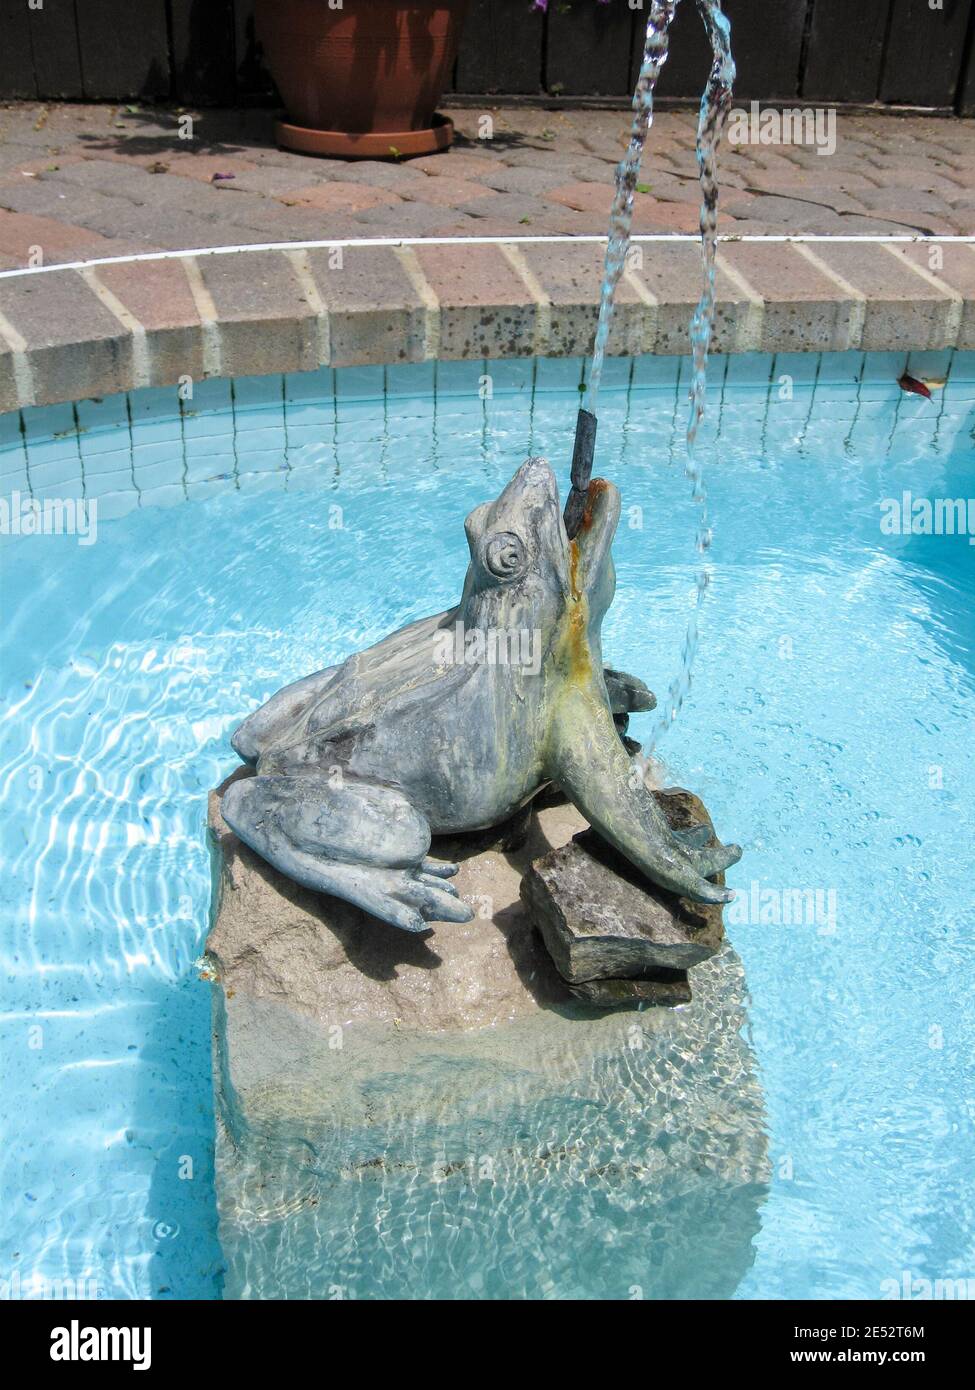 A swimming pool feature in the shape of a frog  spouting water. Stock Photo